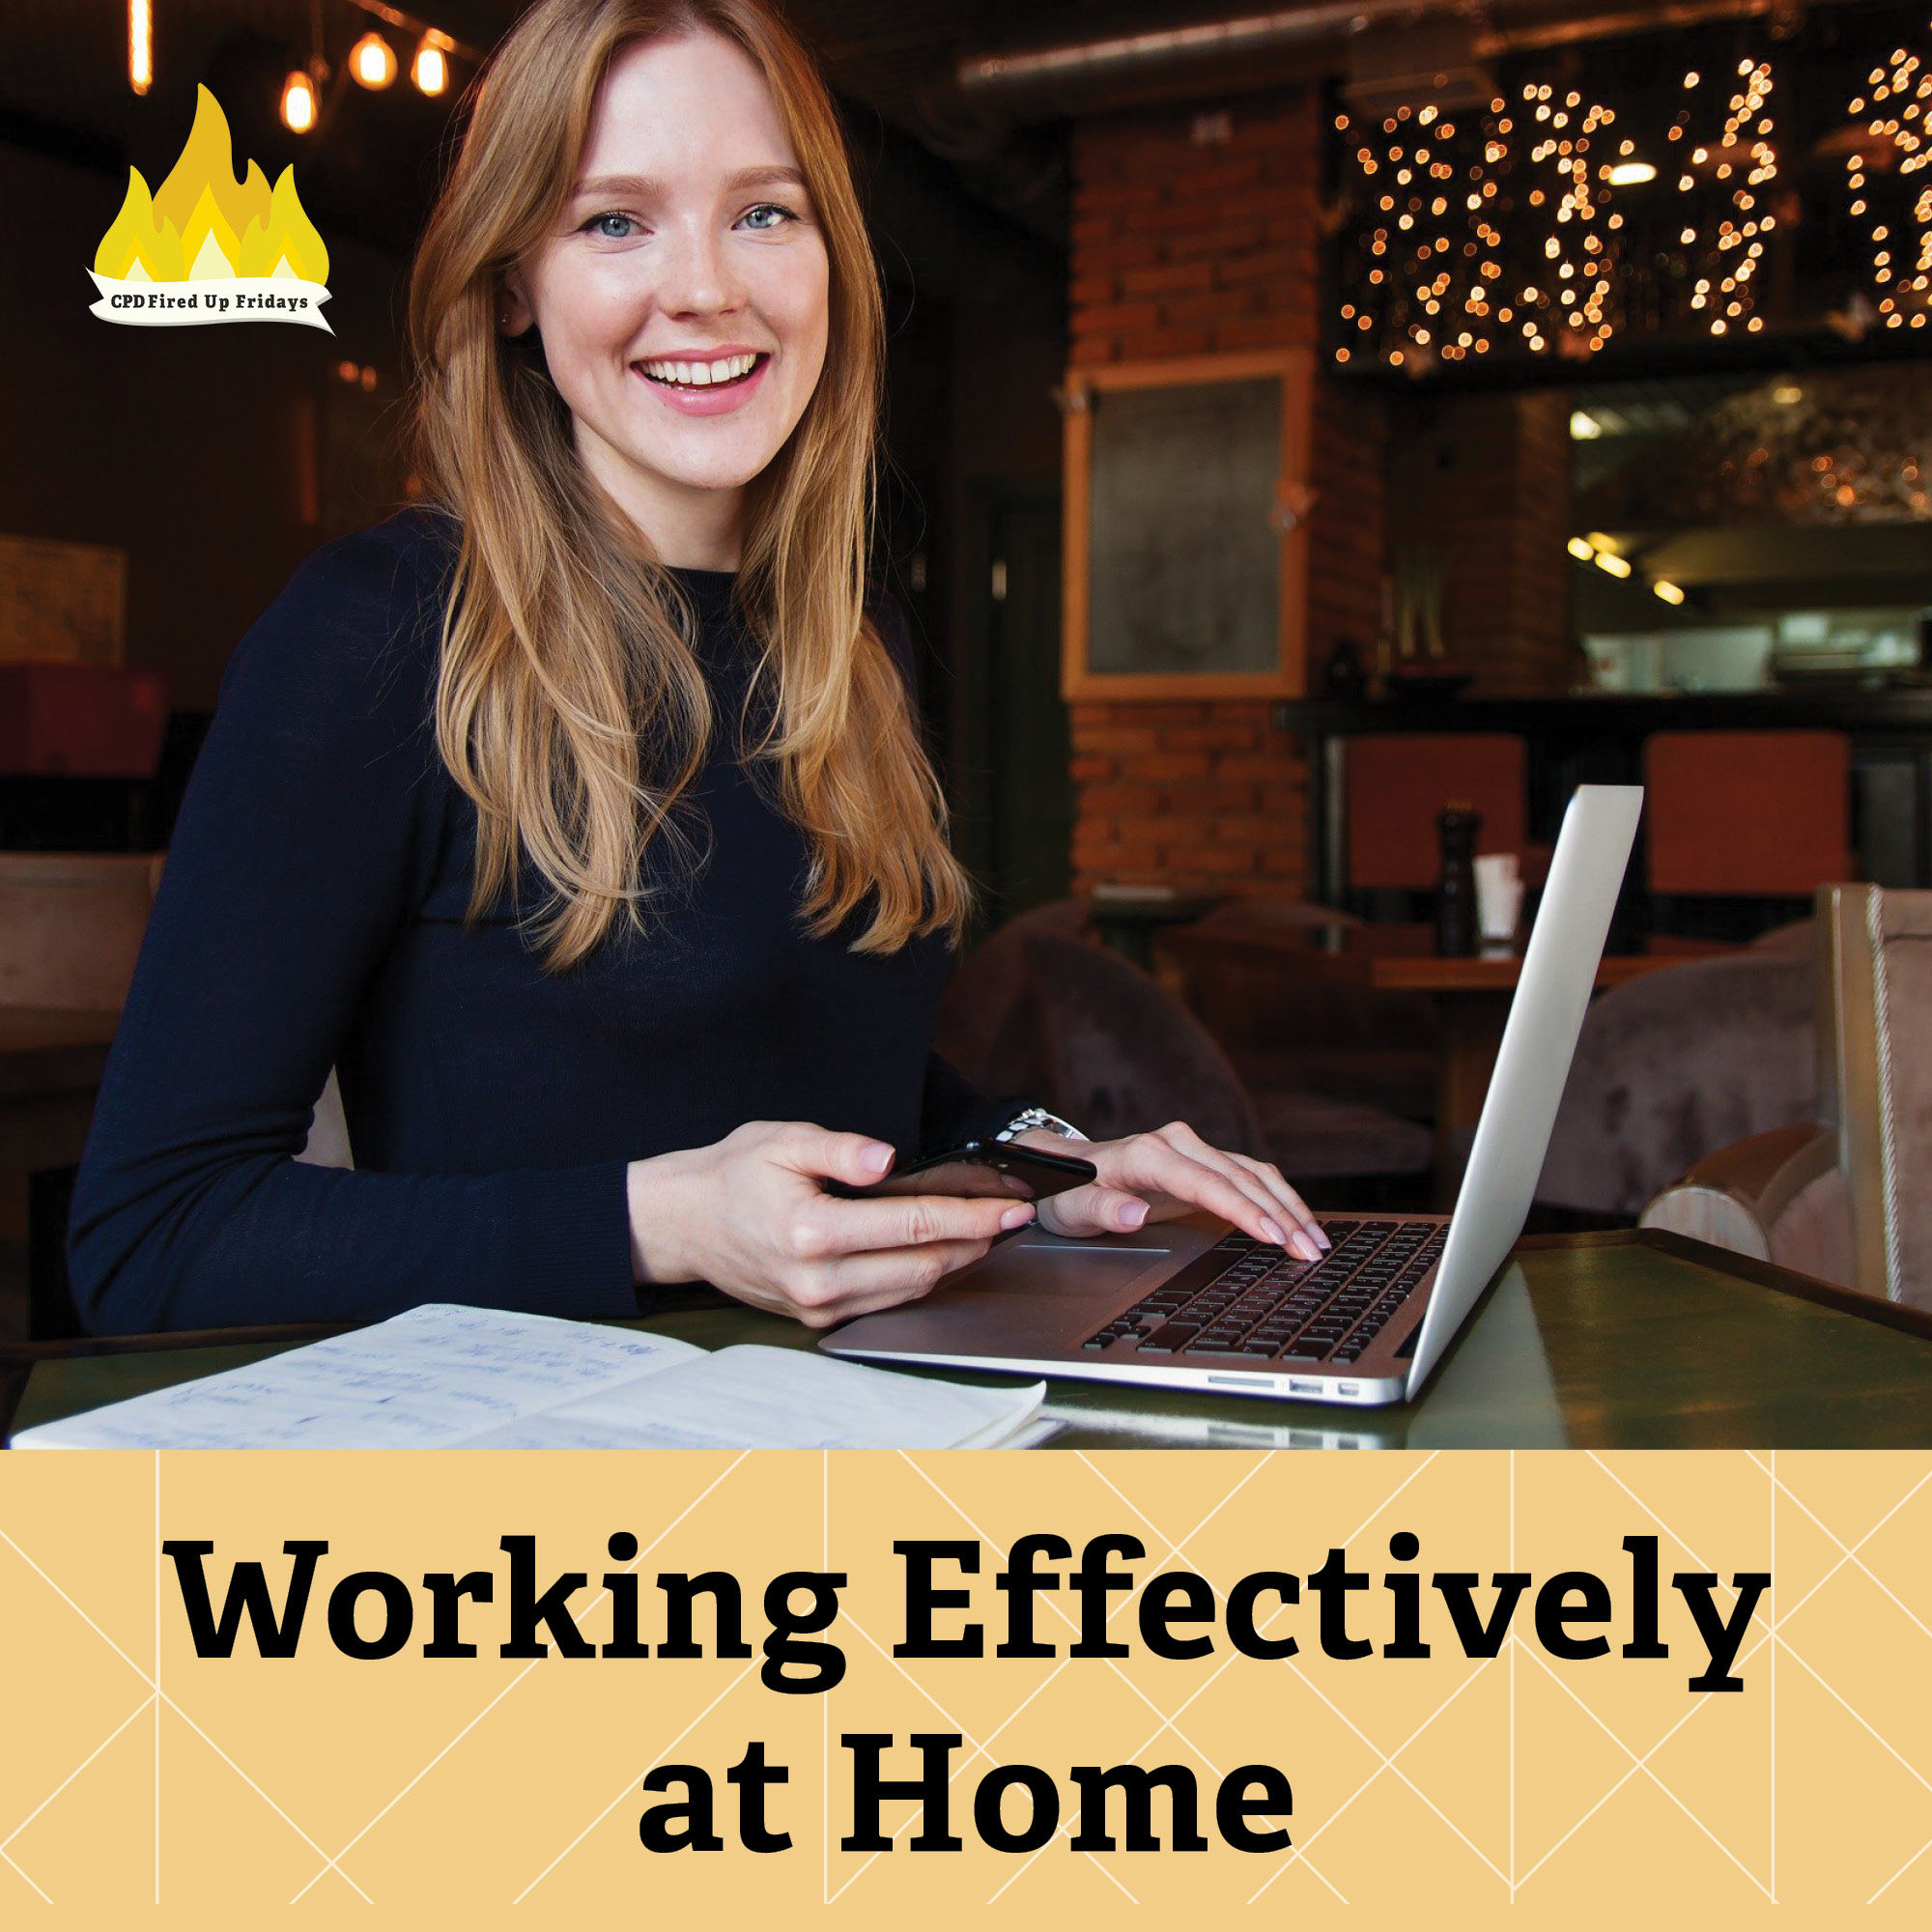 A woman sits at a table in what could be a cafe or a dining room. She smiles at the camera, with her laptop on the table and her phone in one hand. Beneath her, text reads: 'Working Effectively at Home.'